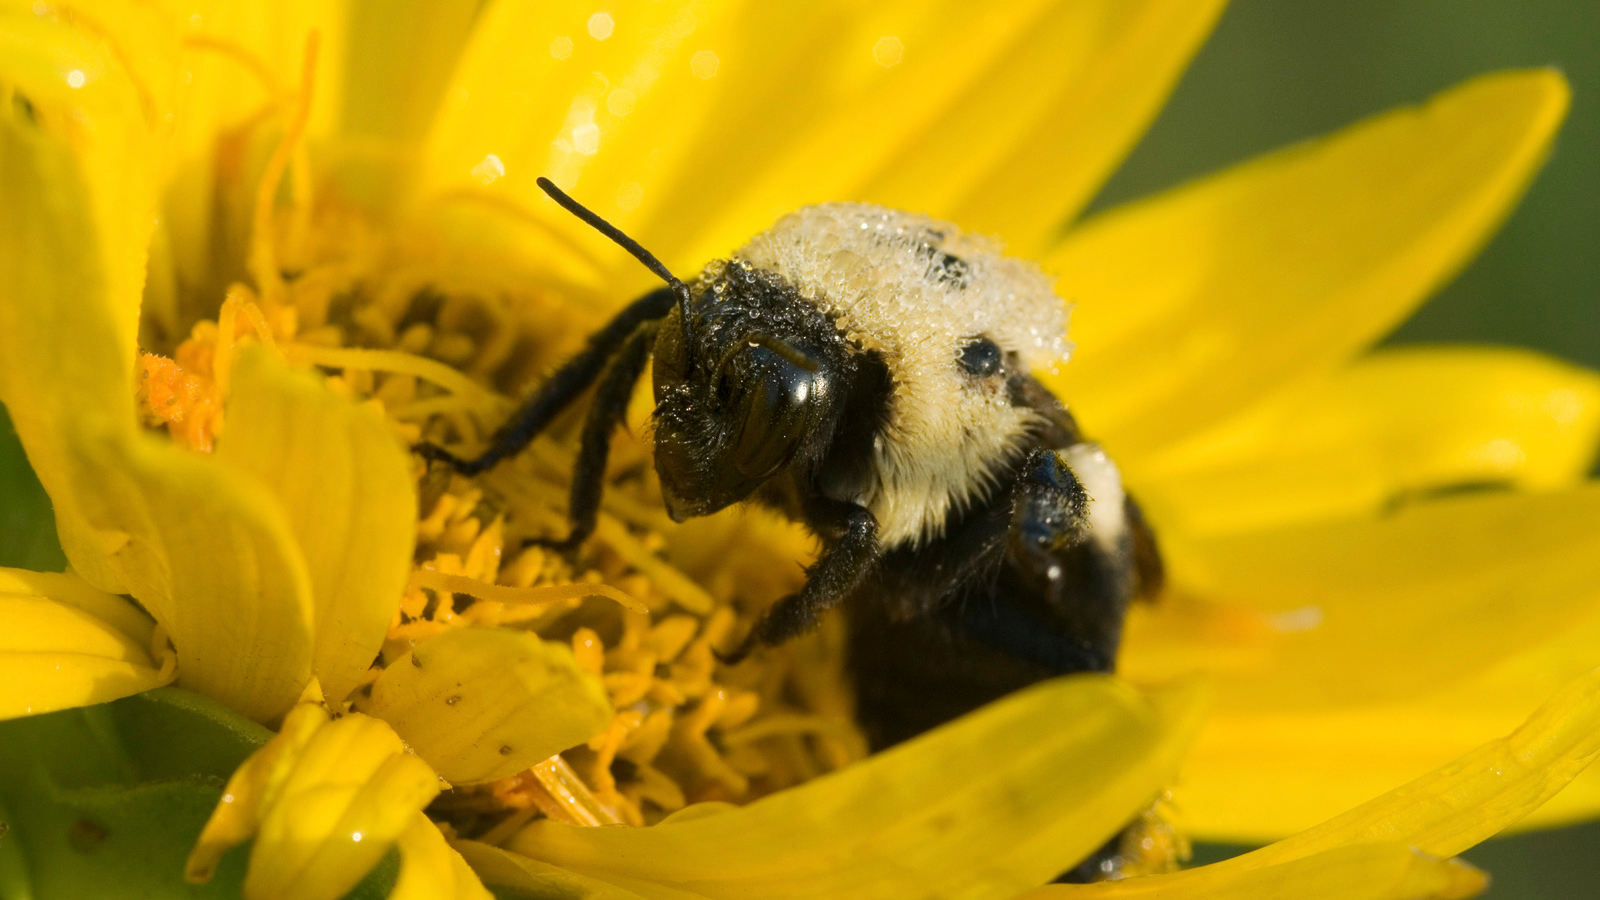 IV. The Impact of Bumblebees on Agriculture and Crop Production